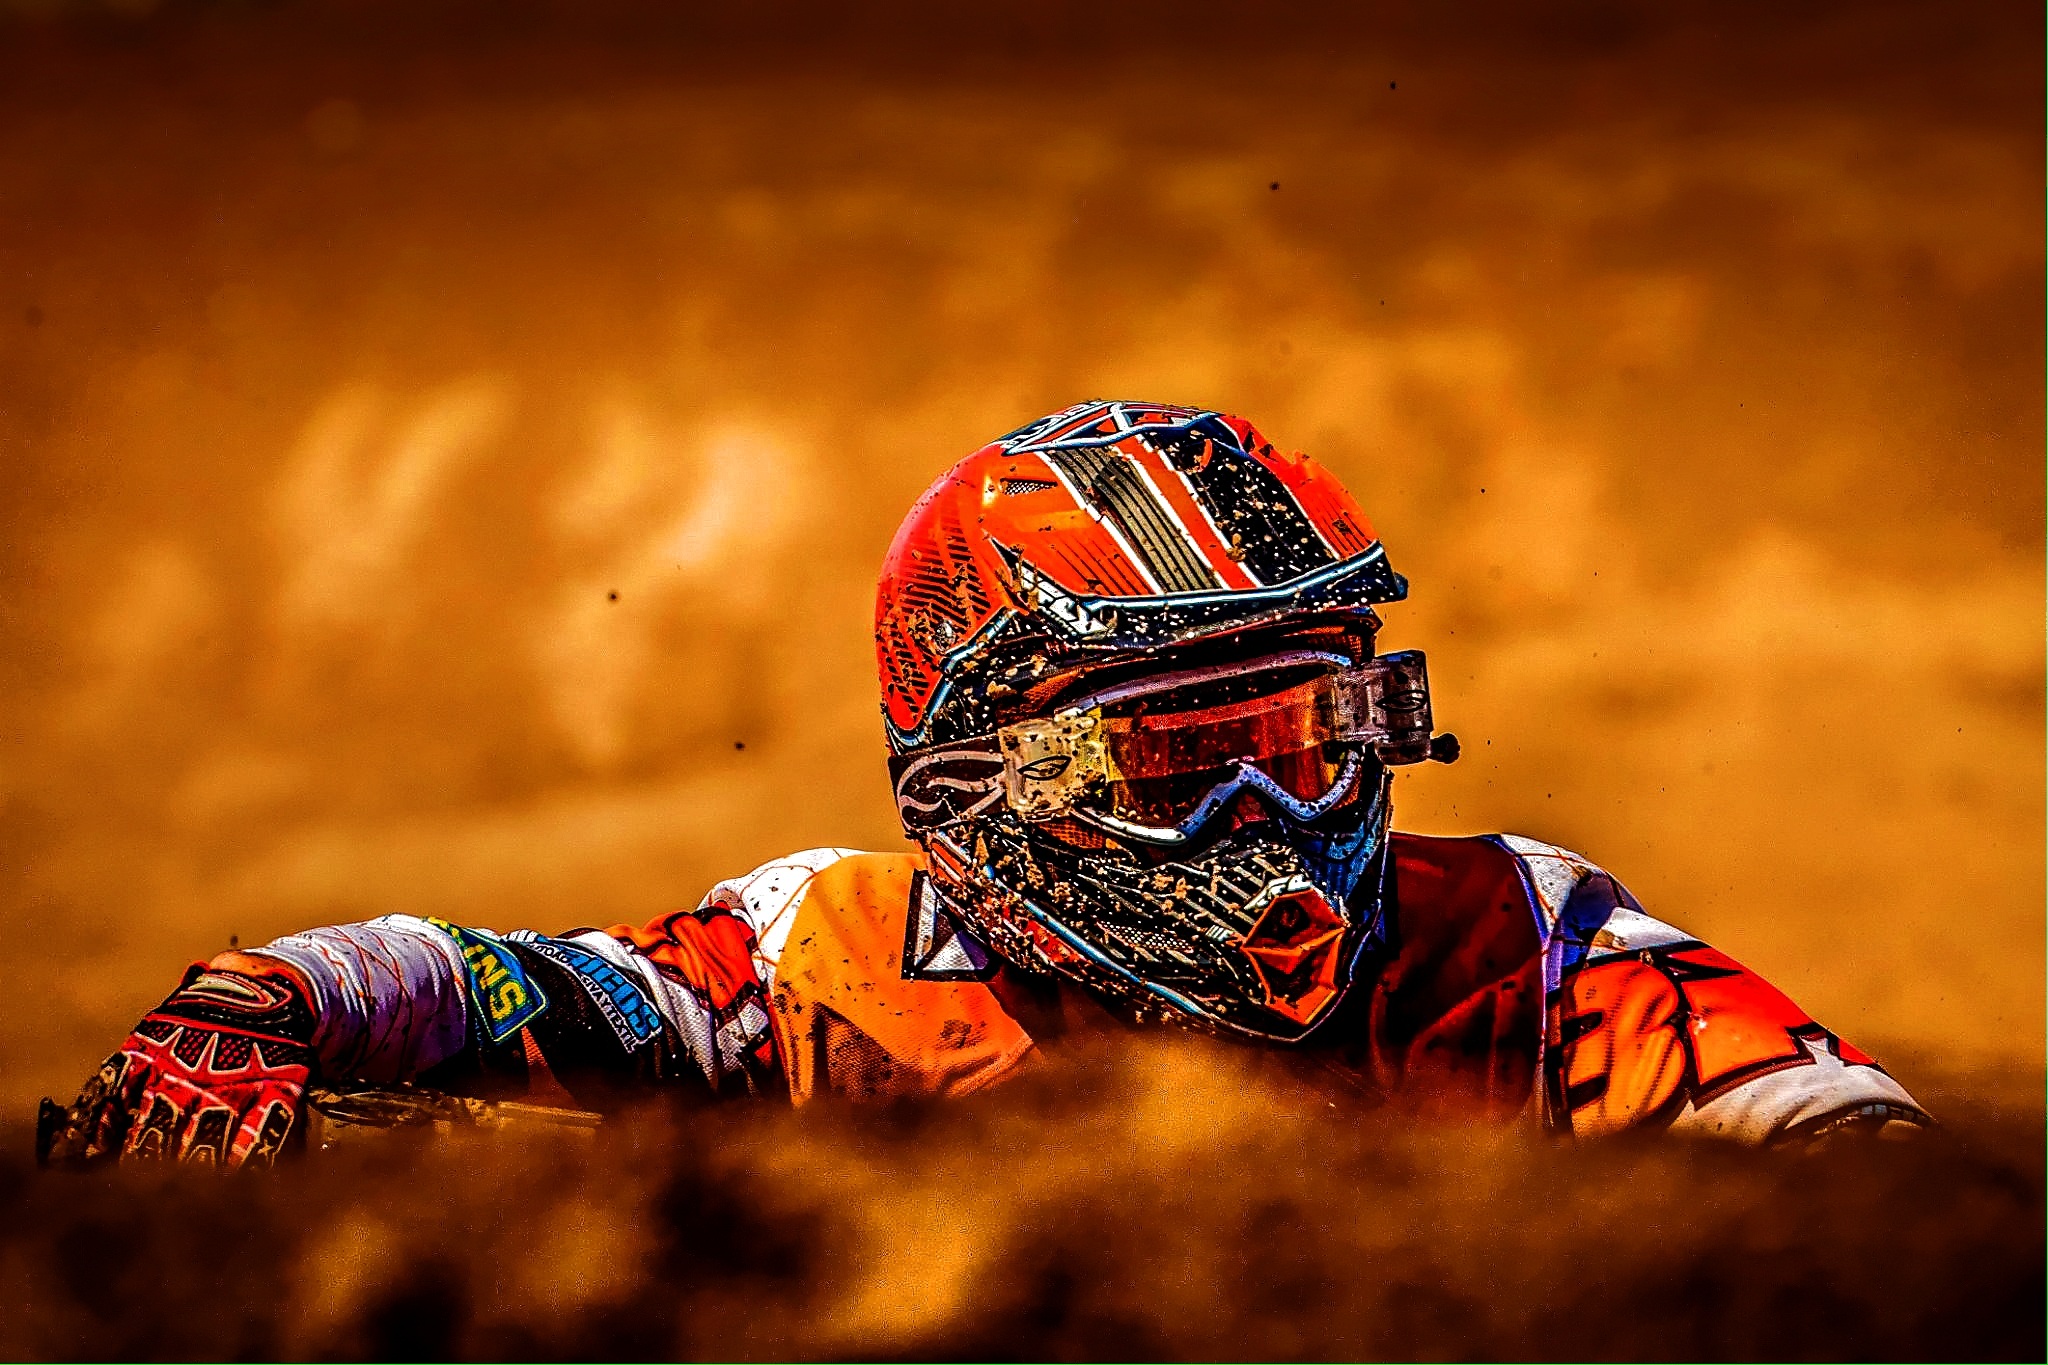 Wallpapers motocross holiday extreme sport on the desktop